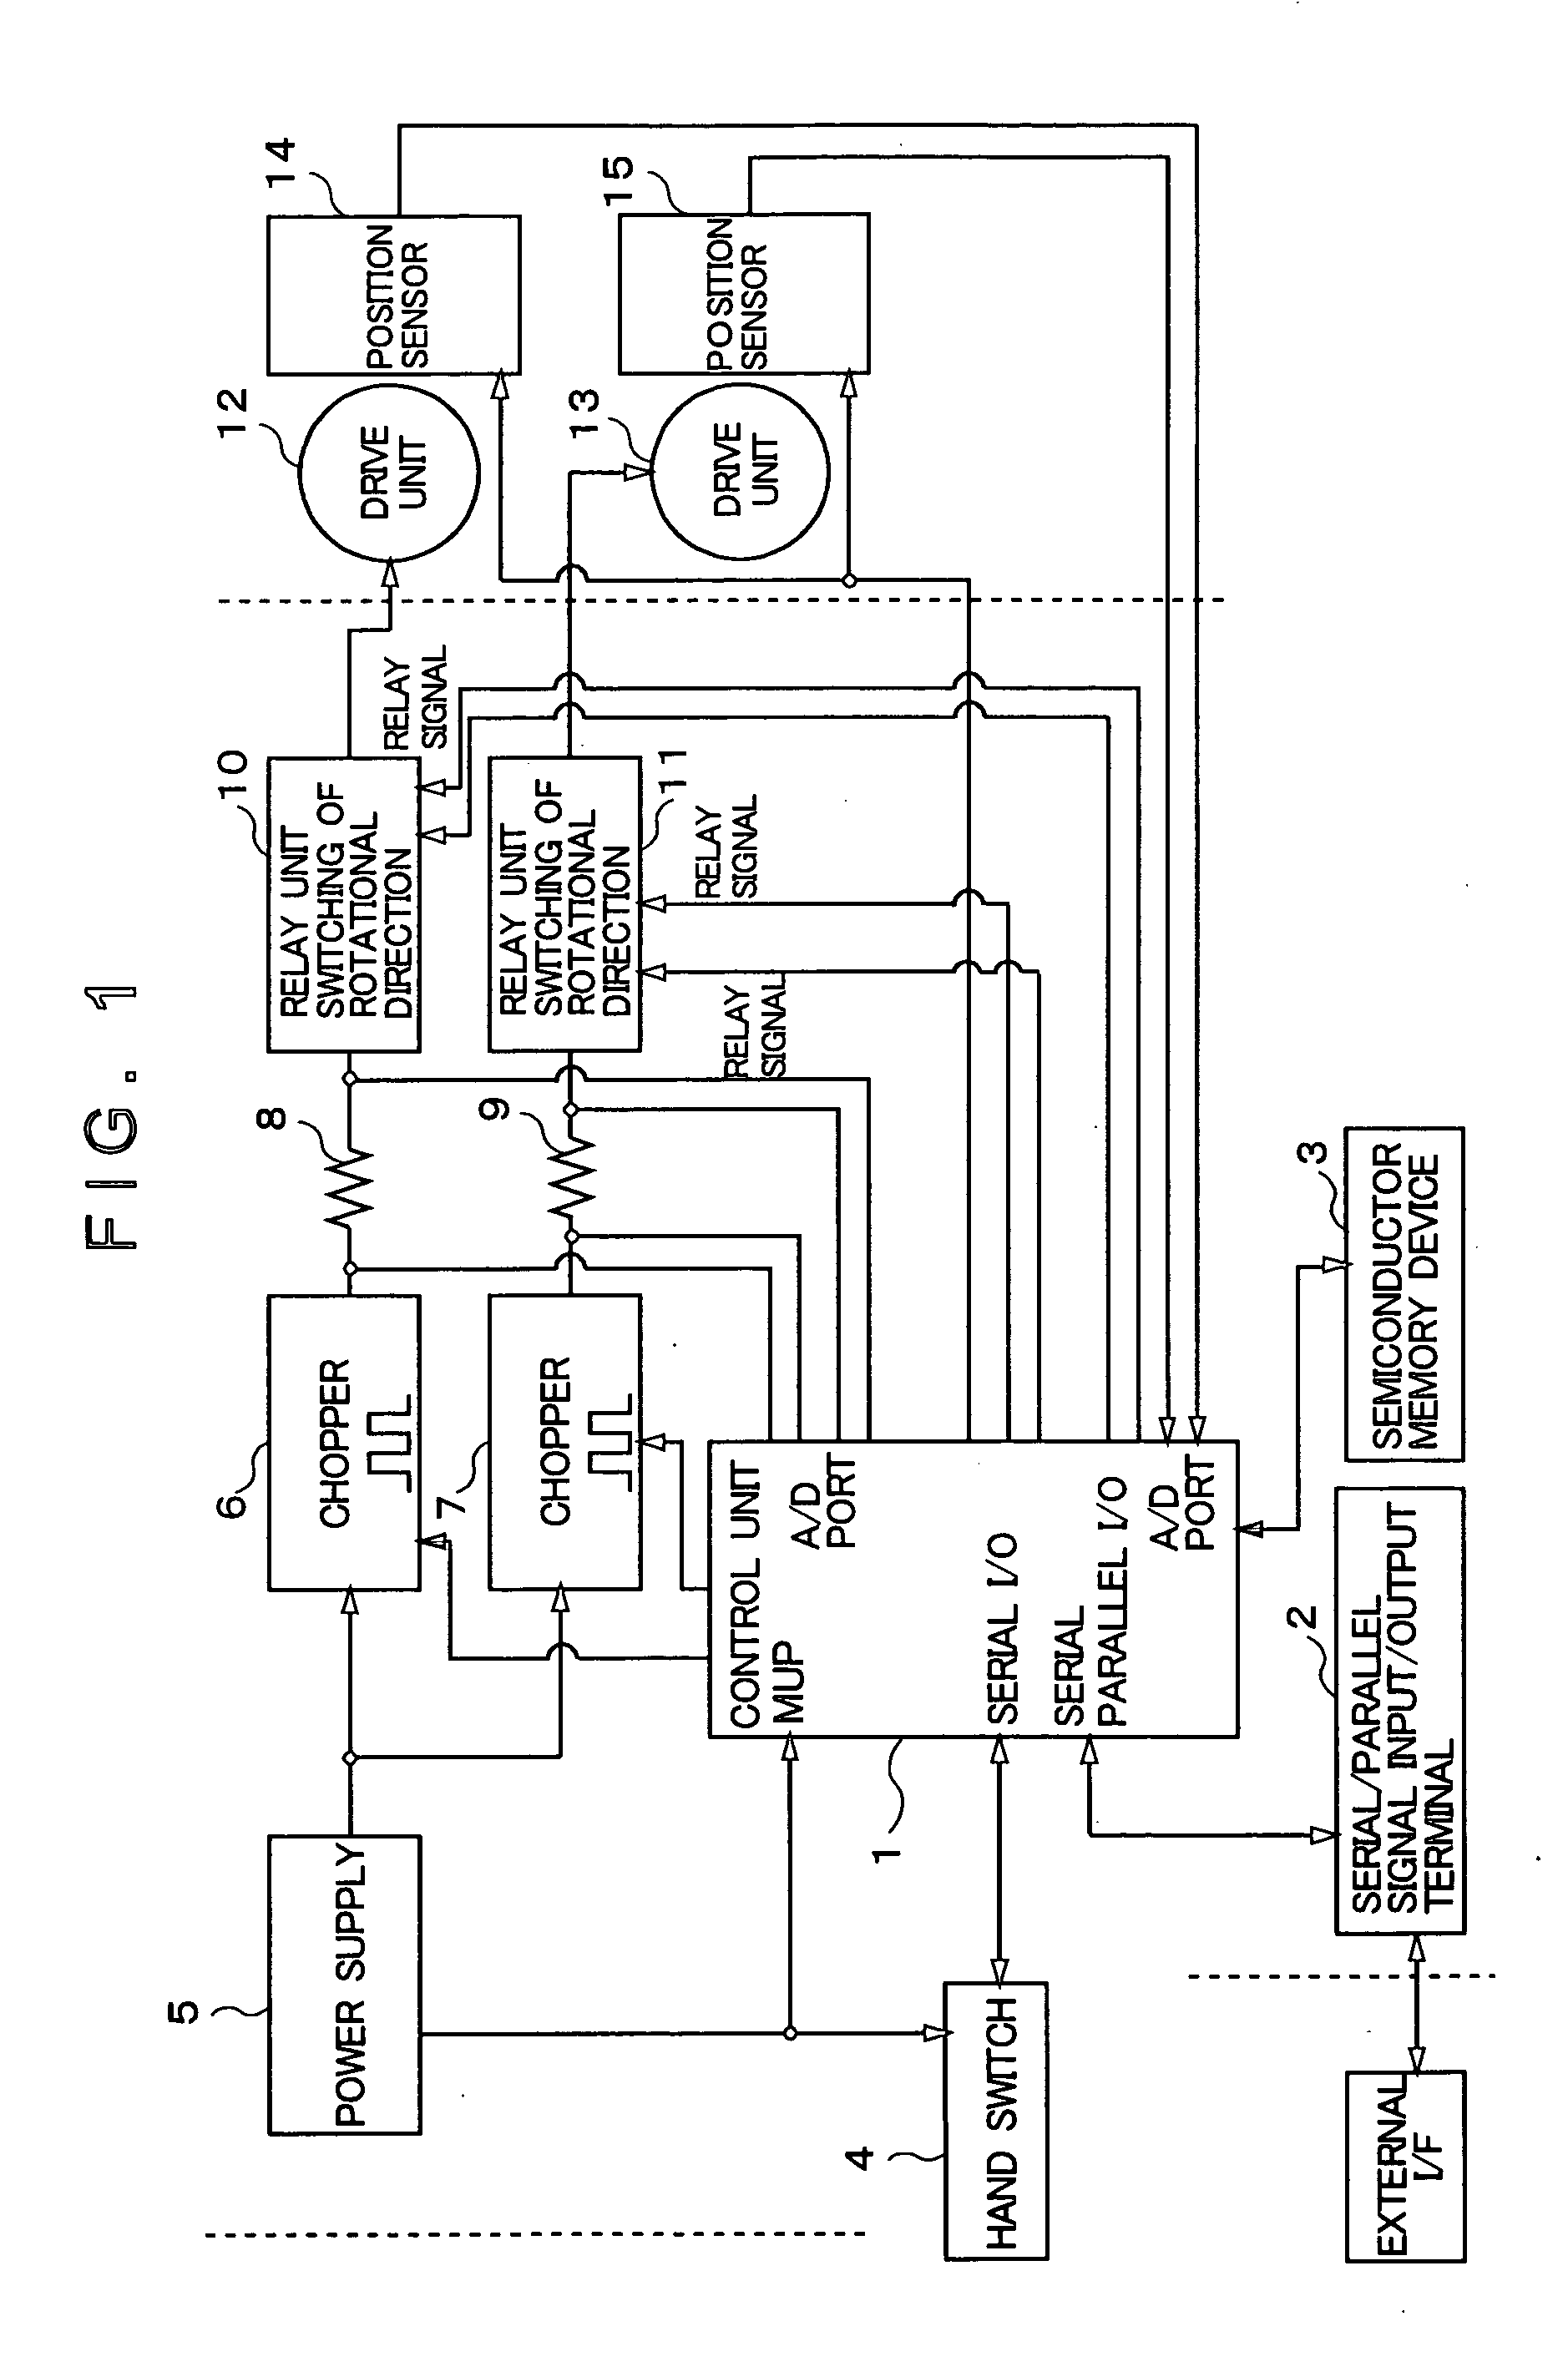 Operation control apparatus for electric bed